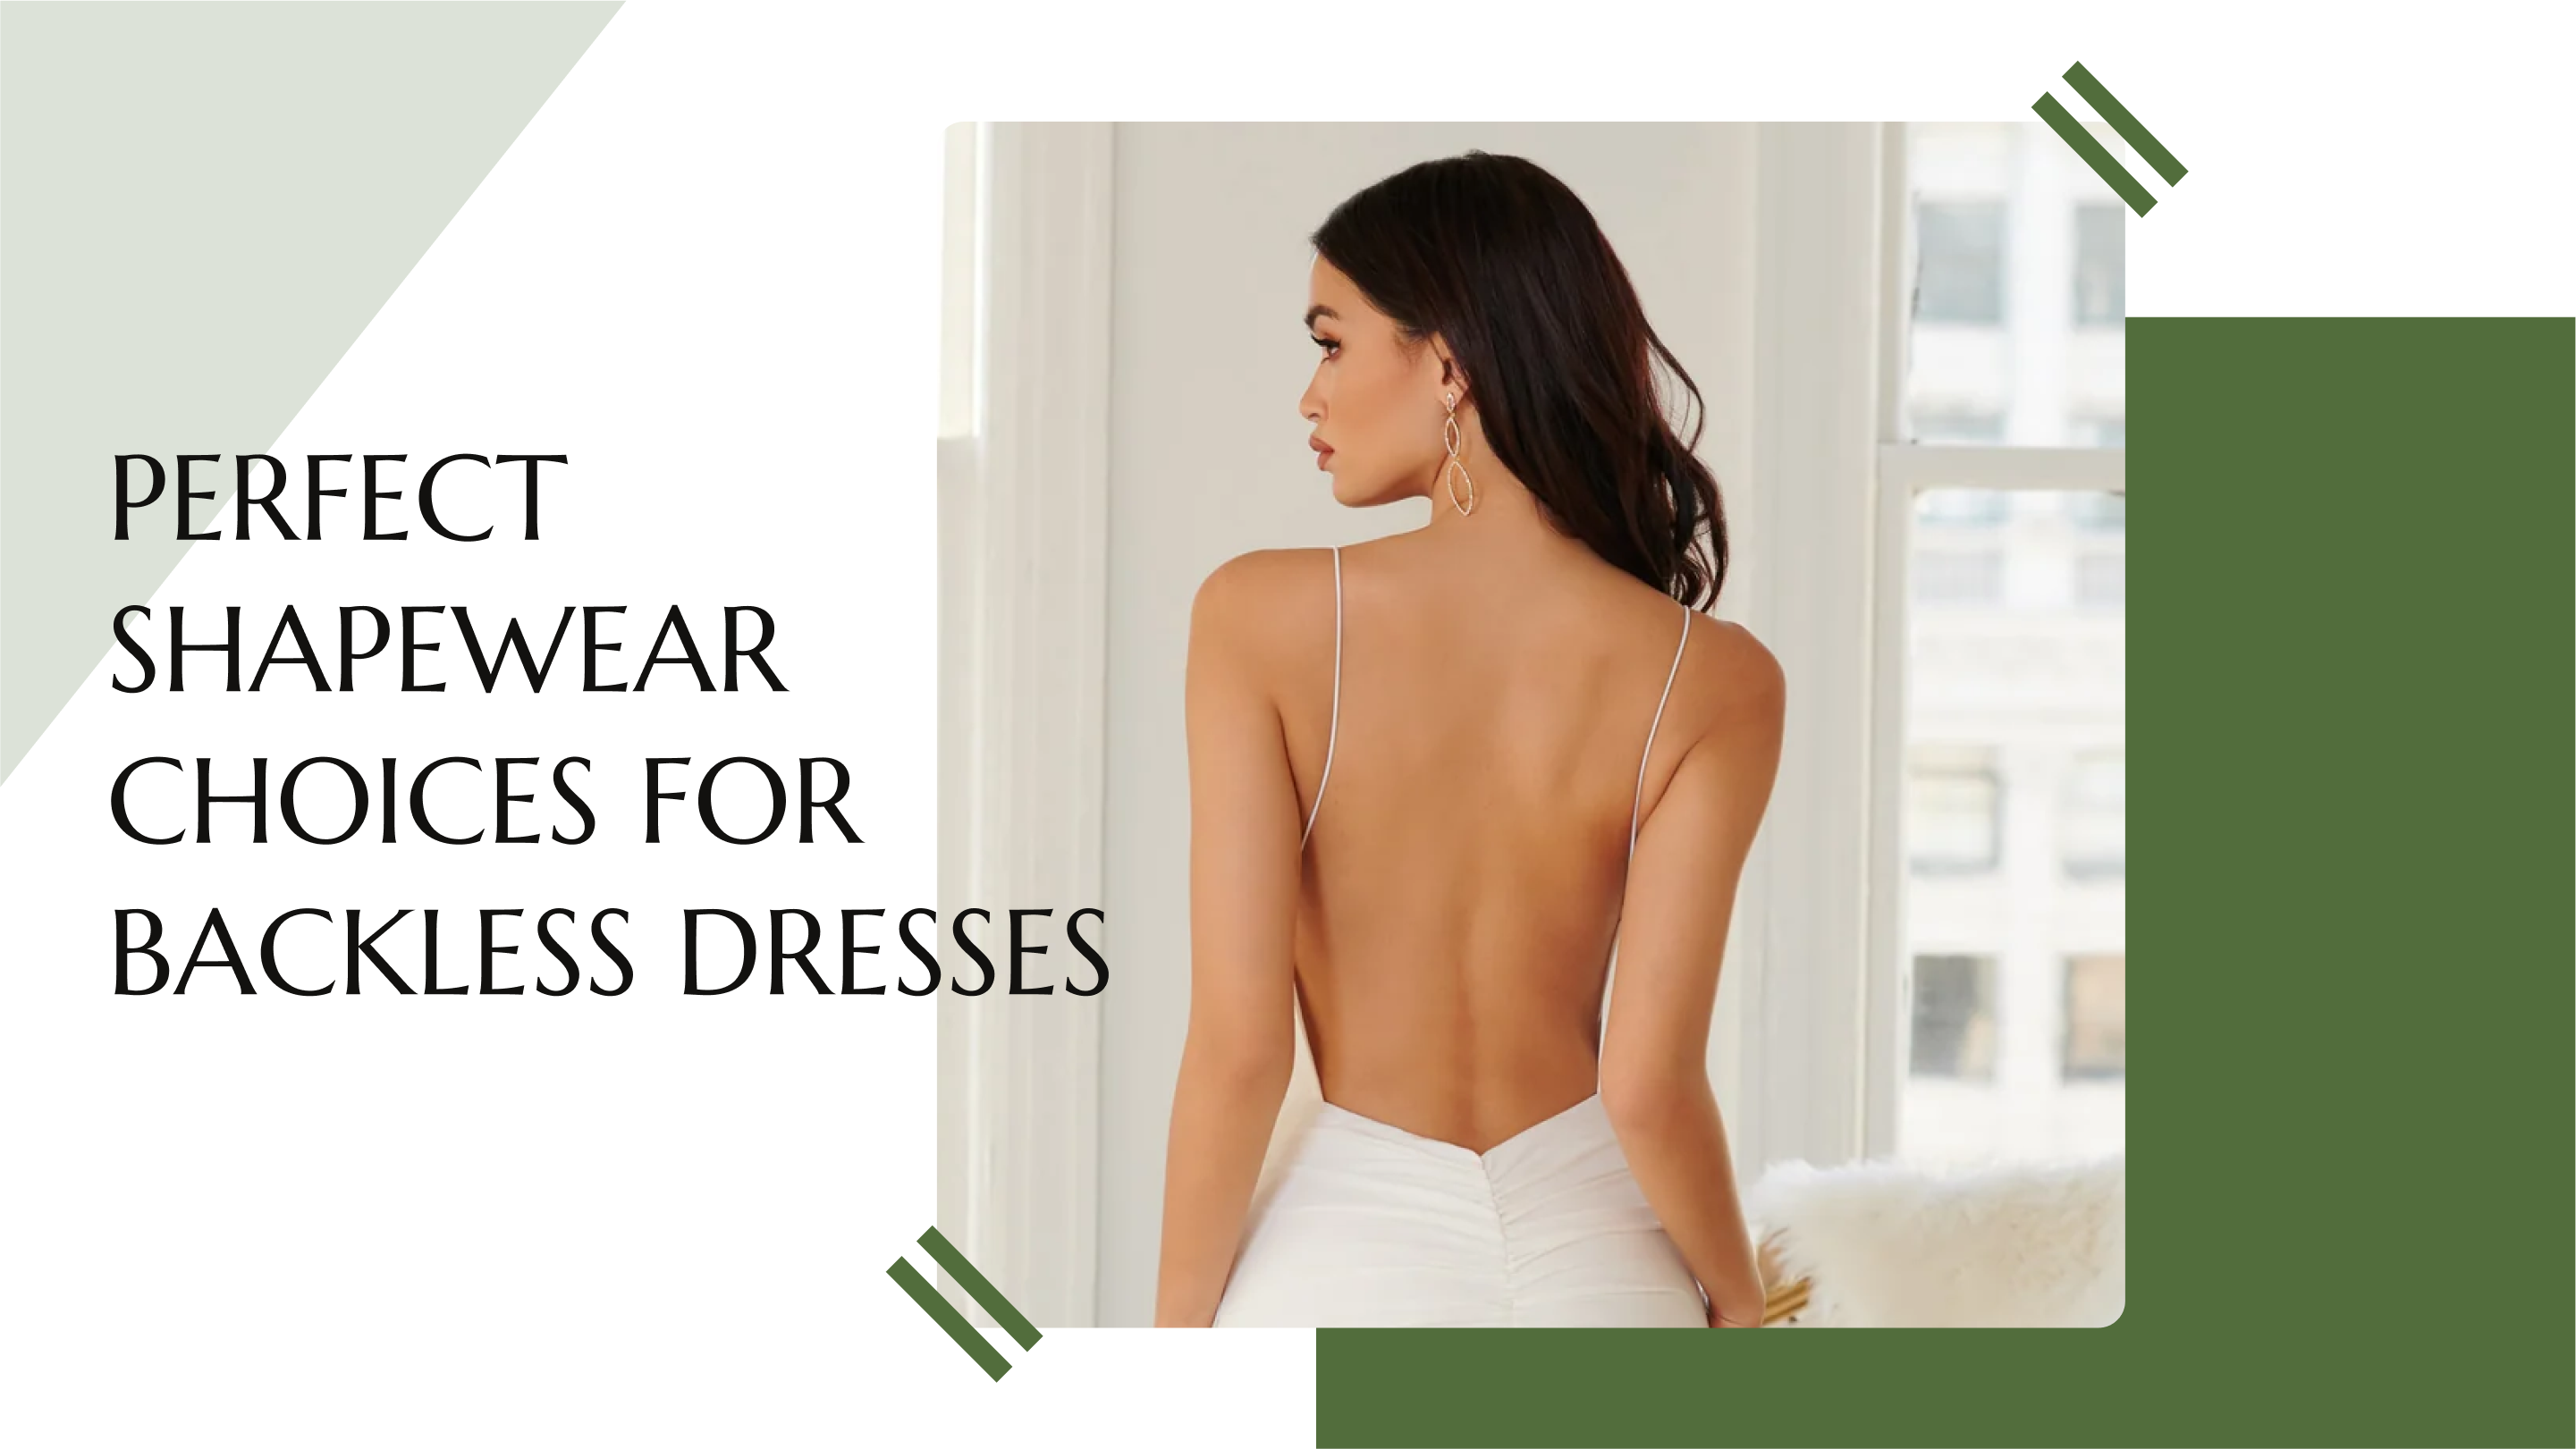 Perfect Shapewear Choices for Backless Dresses